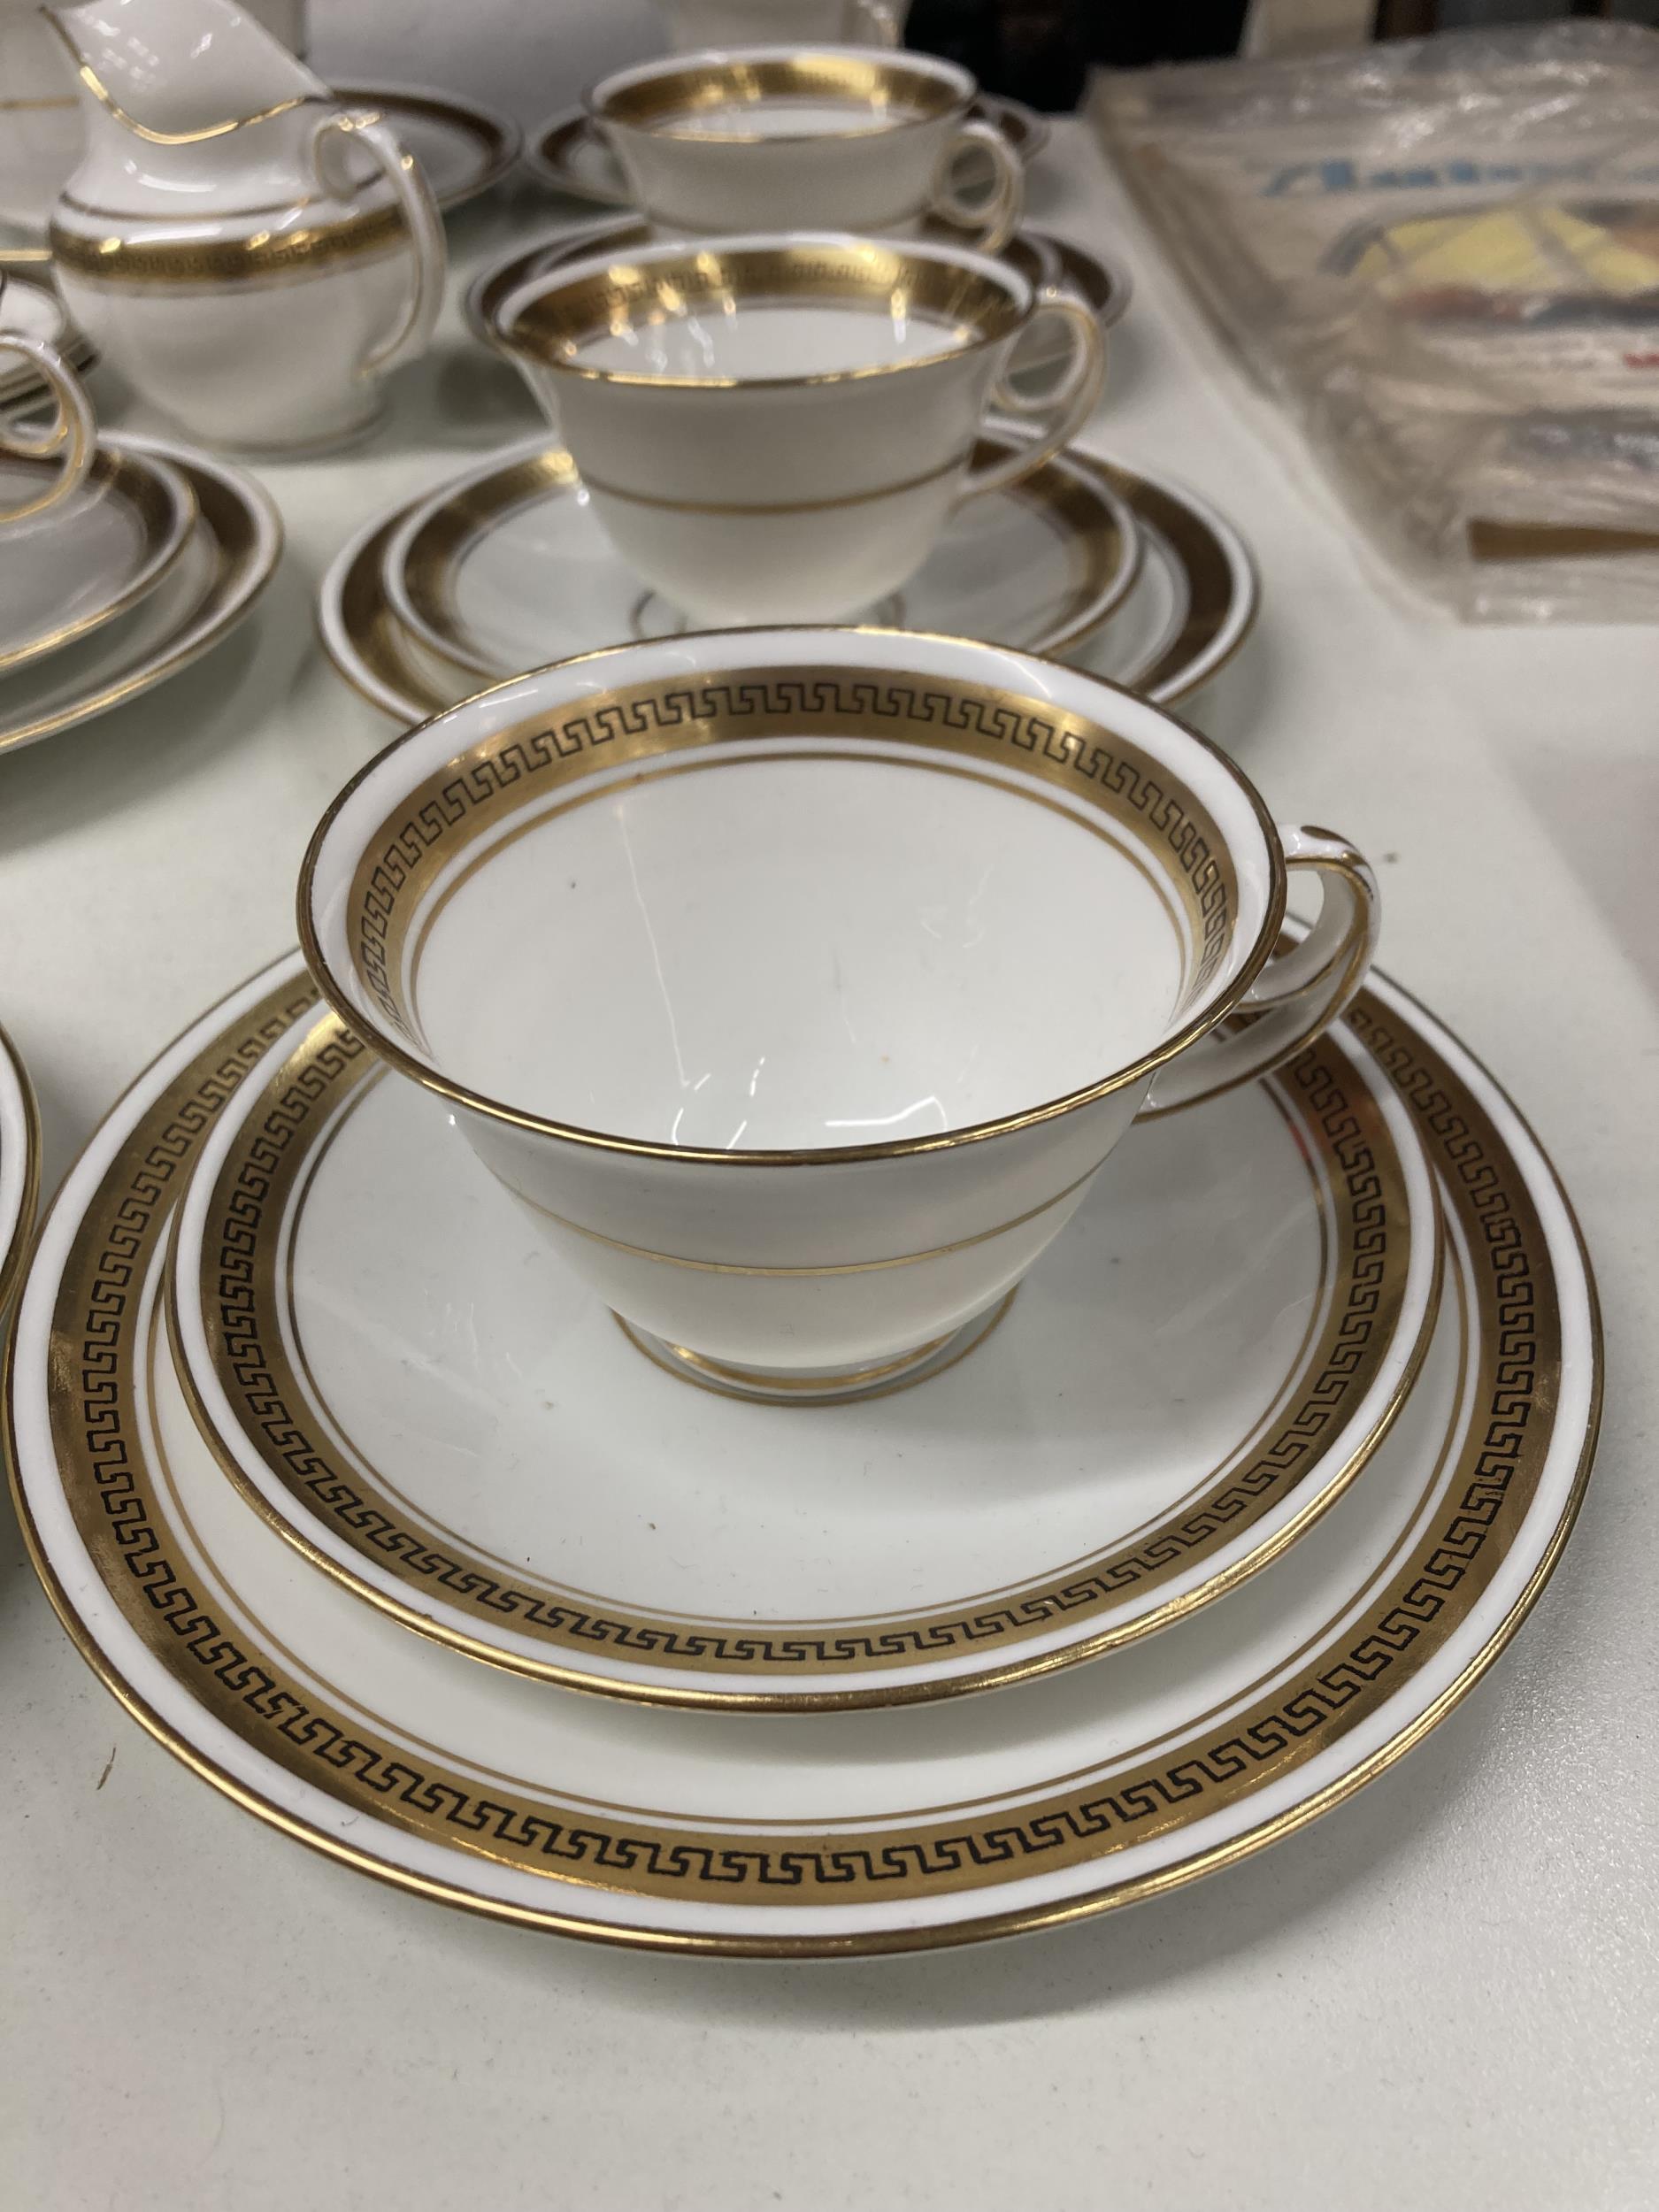 A DIAMOND CHINA WHITE AND GILT PART TEASET TO INCLUDE CUPS, SAUCERS, PLATES, CREAM JUG, BOWL, ETC - Image 2 of 3